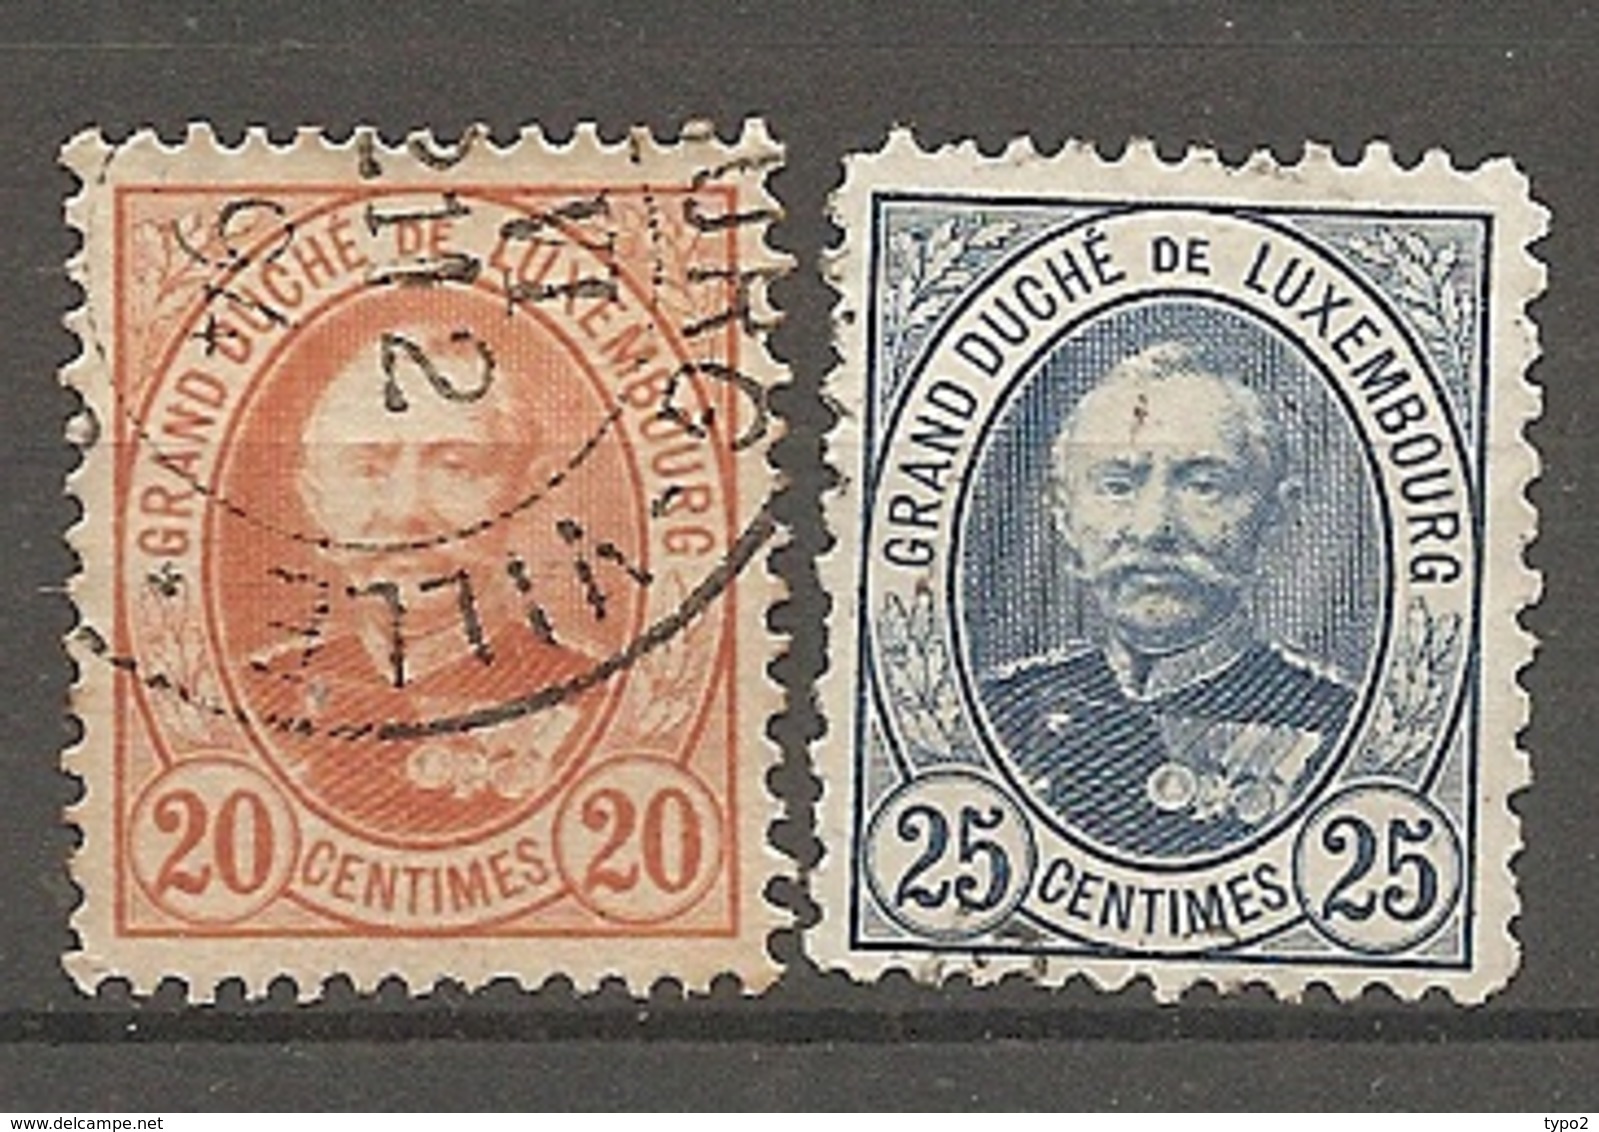 LUX 1891 Yv. N° 61,62  (o)  20 C, 15c   Adolphe Ier Cote 1,25 Euro BE  2 Scans - 1891 Adolphe Front Side